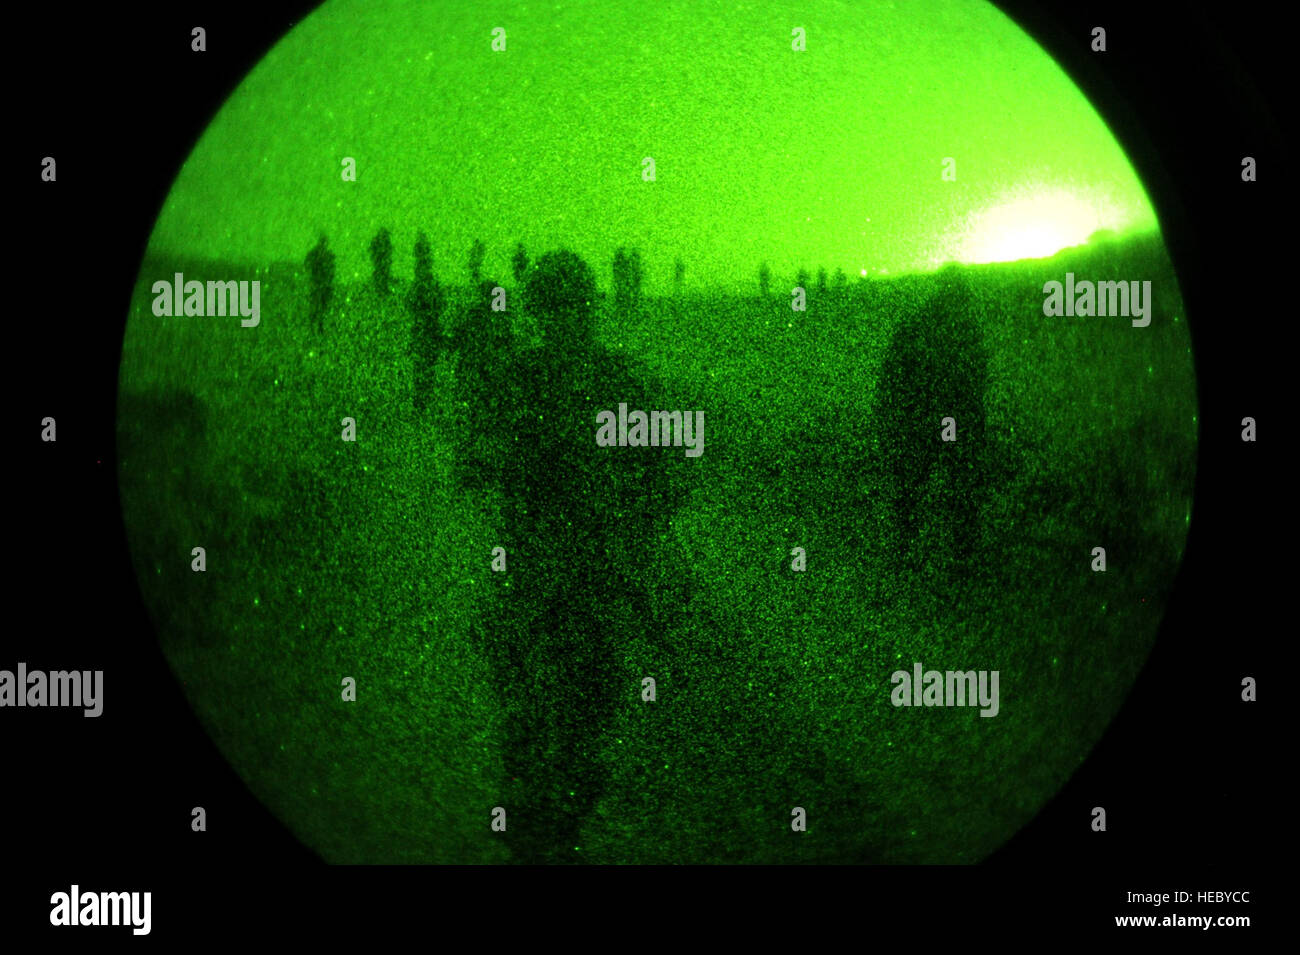 Djiboutian army soldiers walk along their route during a night vision goggle class in Arta, Djibouti, on March 25, 2012. The U.S. Army's 3rd Squadron, 124th Cavalry Regiment, deployed in support of Combined Joint Task Force - Horn of Africa (CJTF-HOA), is helping train Djiboutian army soldiers for an upcoming deployment to Somalia. Stock Photo